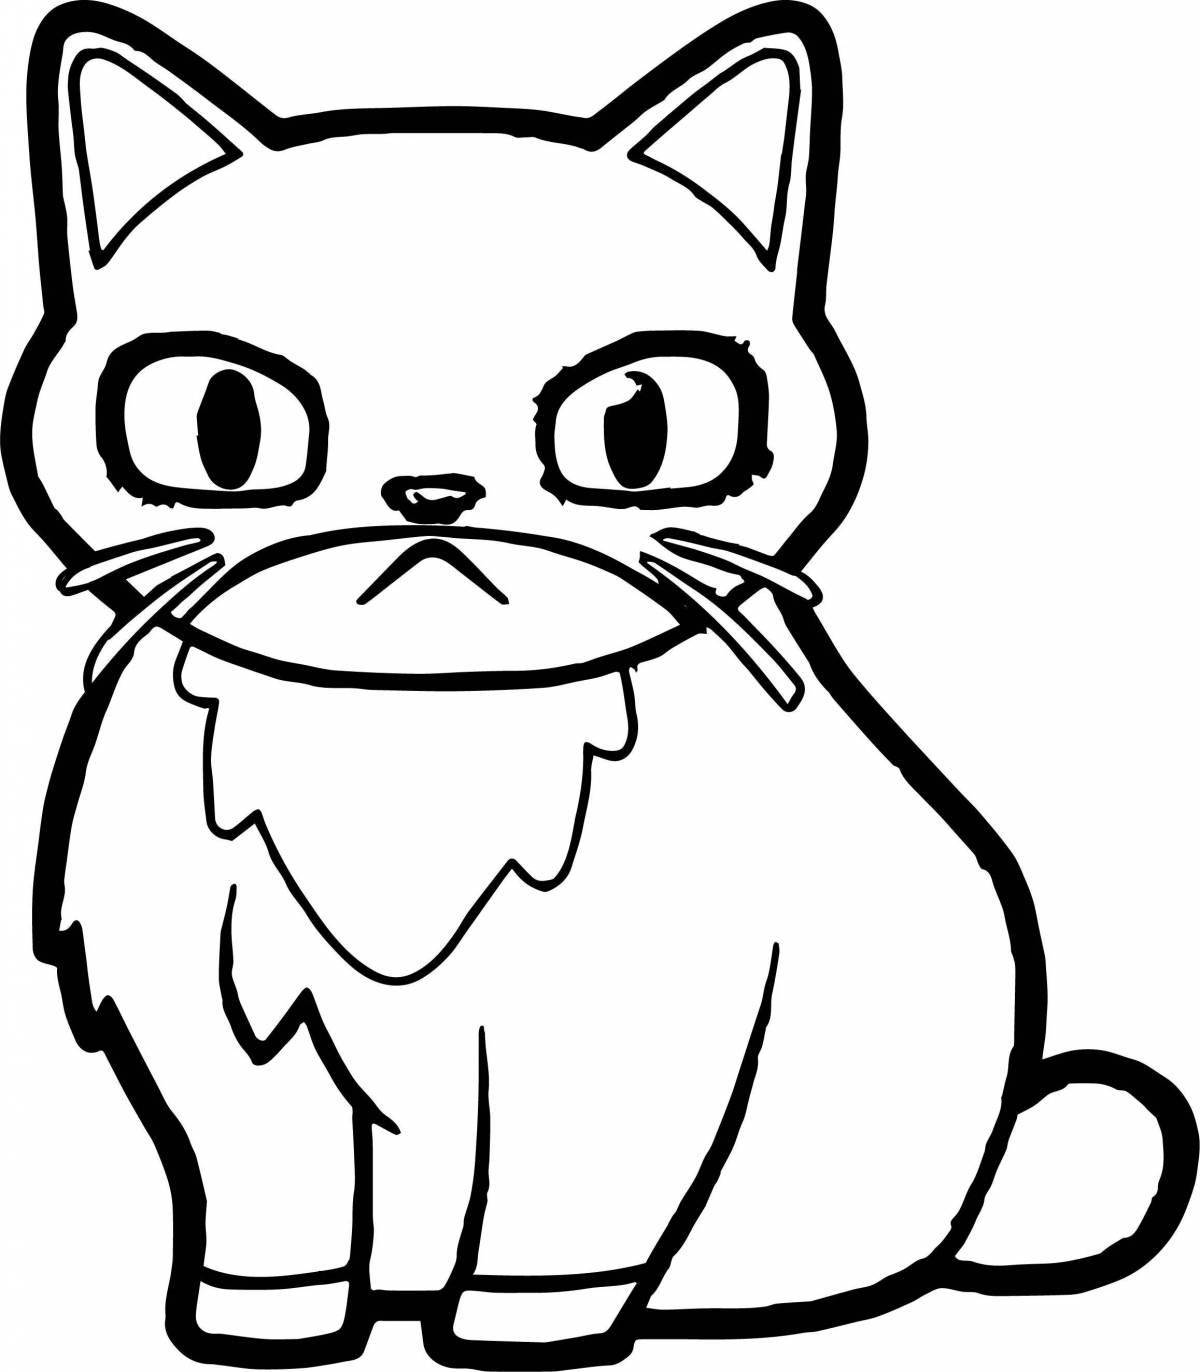 Coloring page alarmed angry cat